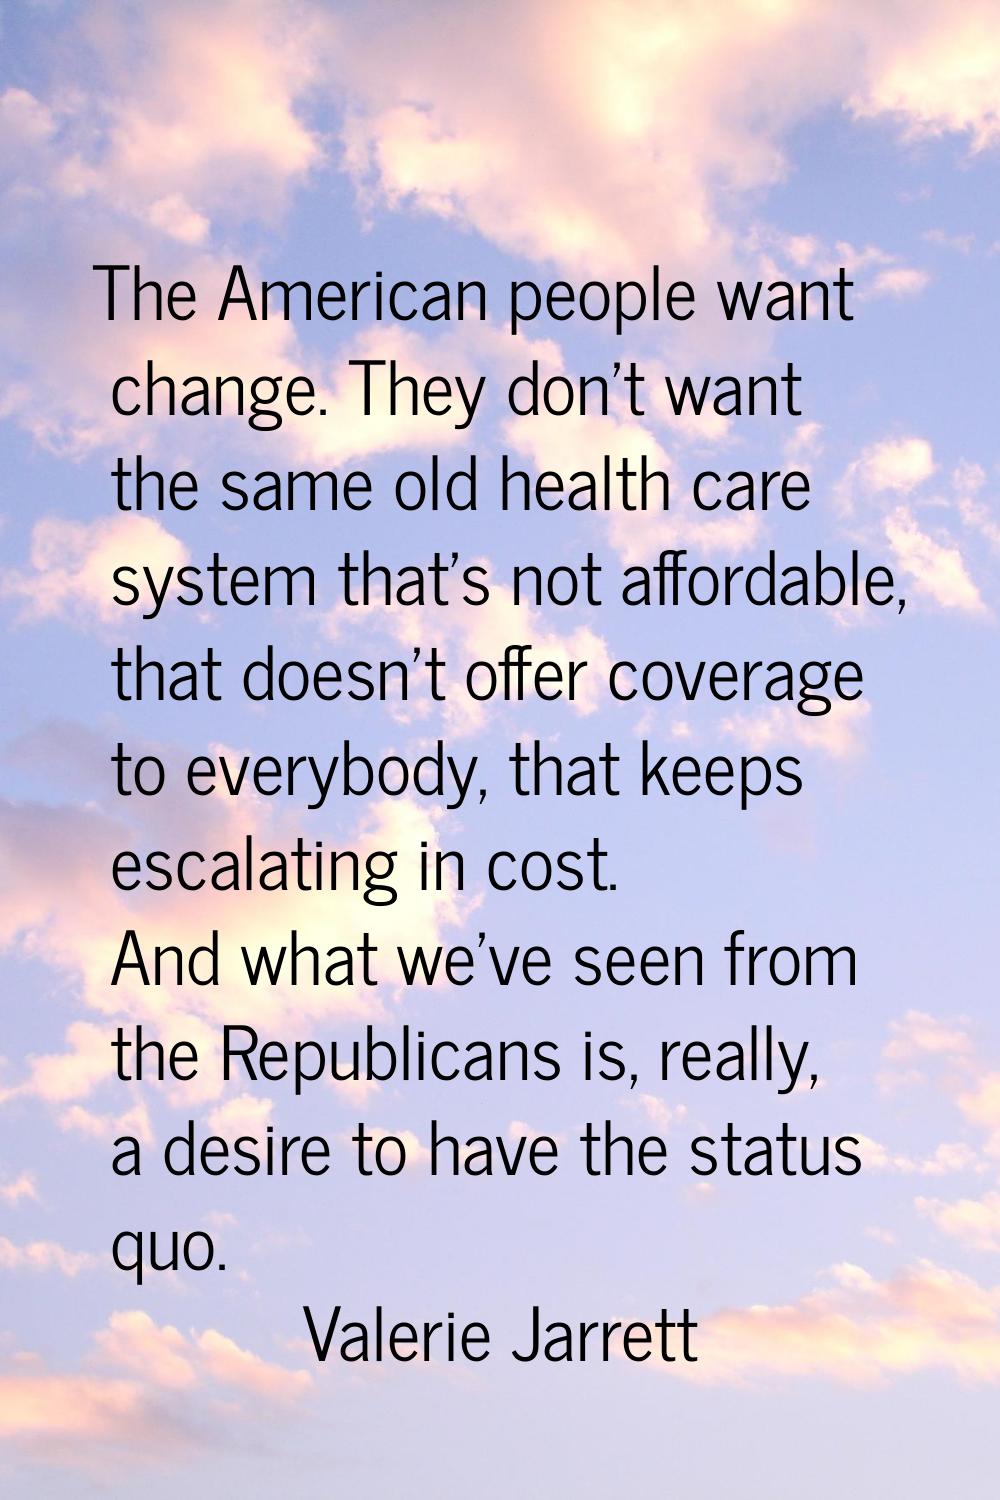 The American people want change. They don't want the same old health care system that's not afforda